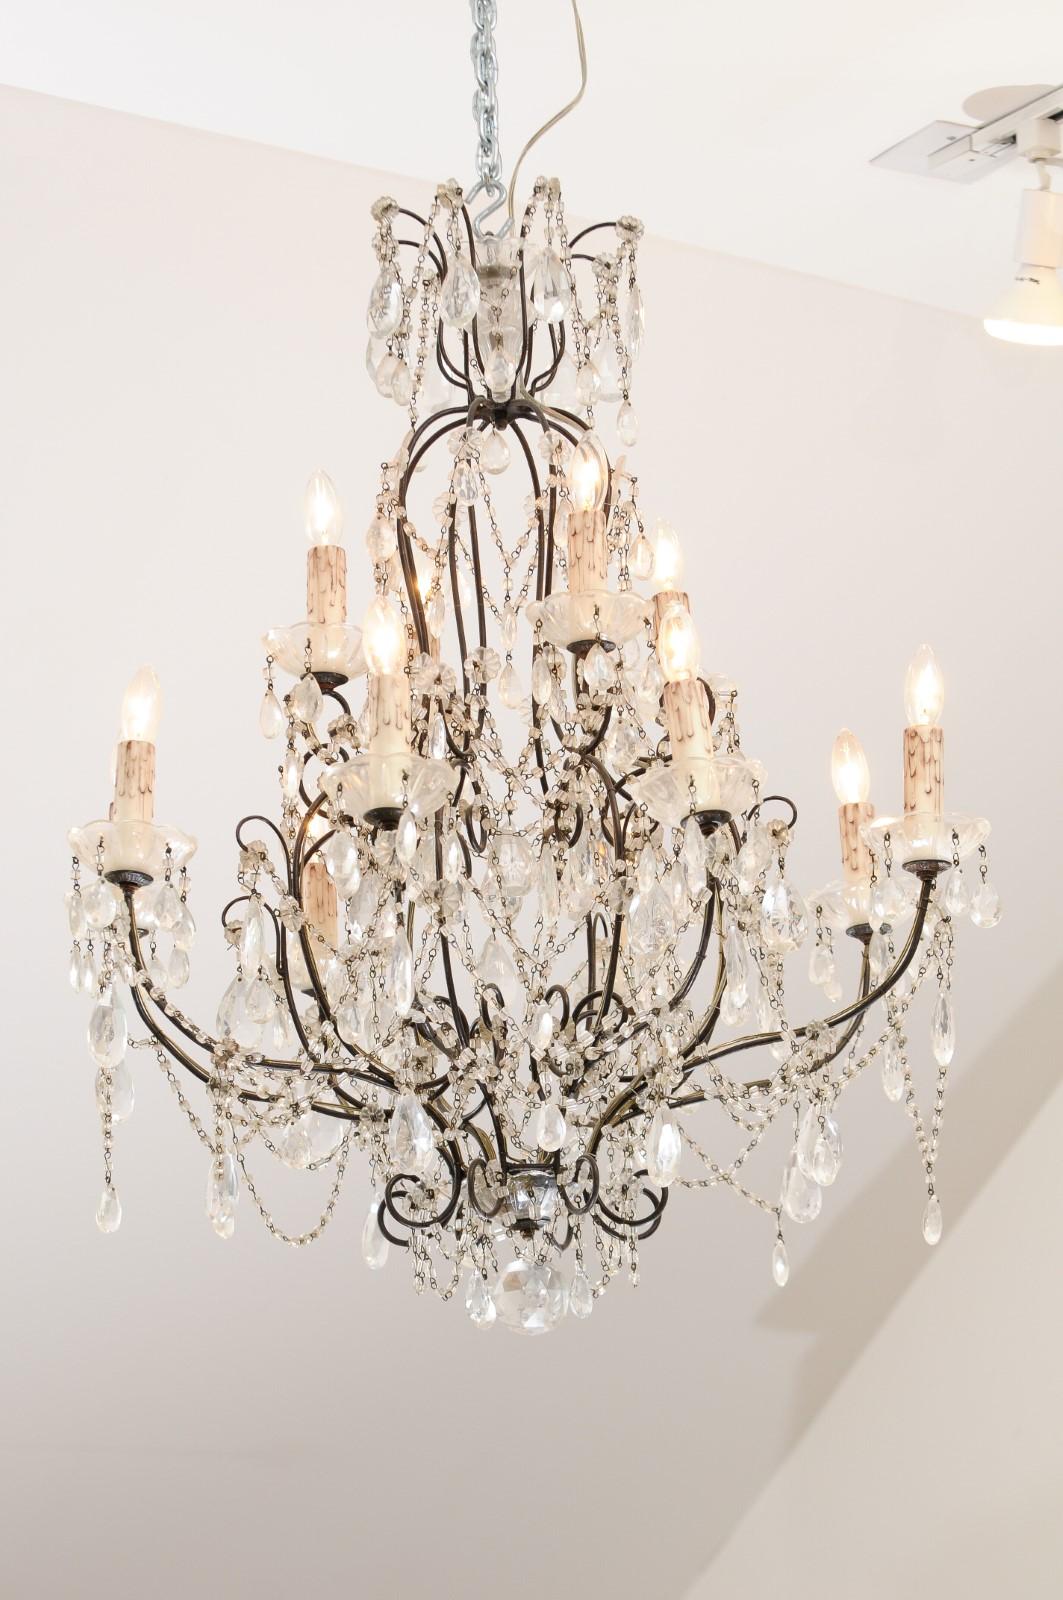 Italian 19th Century 10-Light Crystal and Iron Chandelier with Scrolling Arms For Sale 9